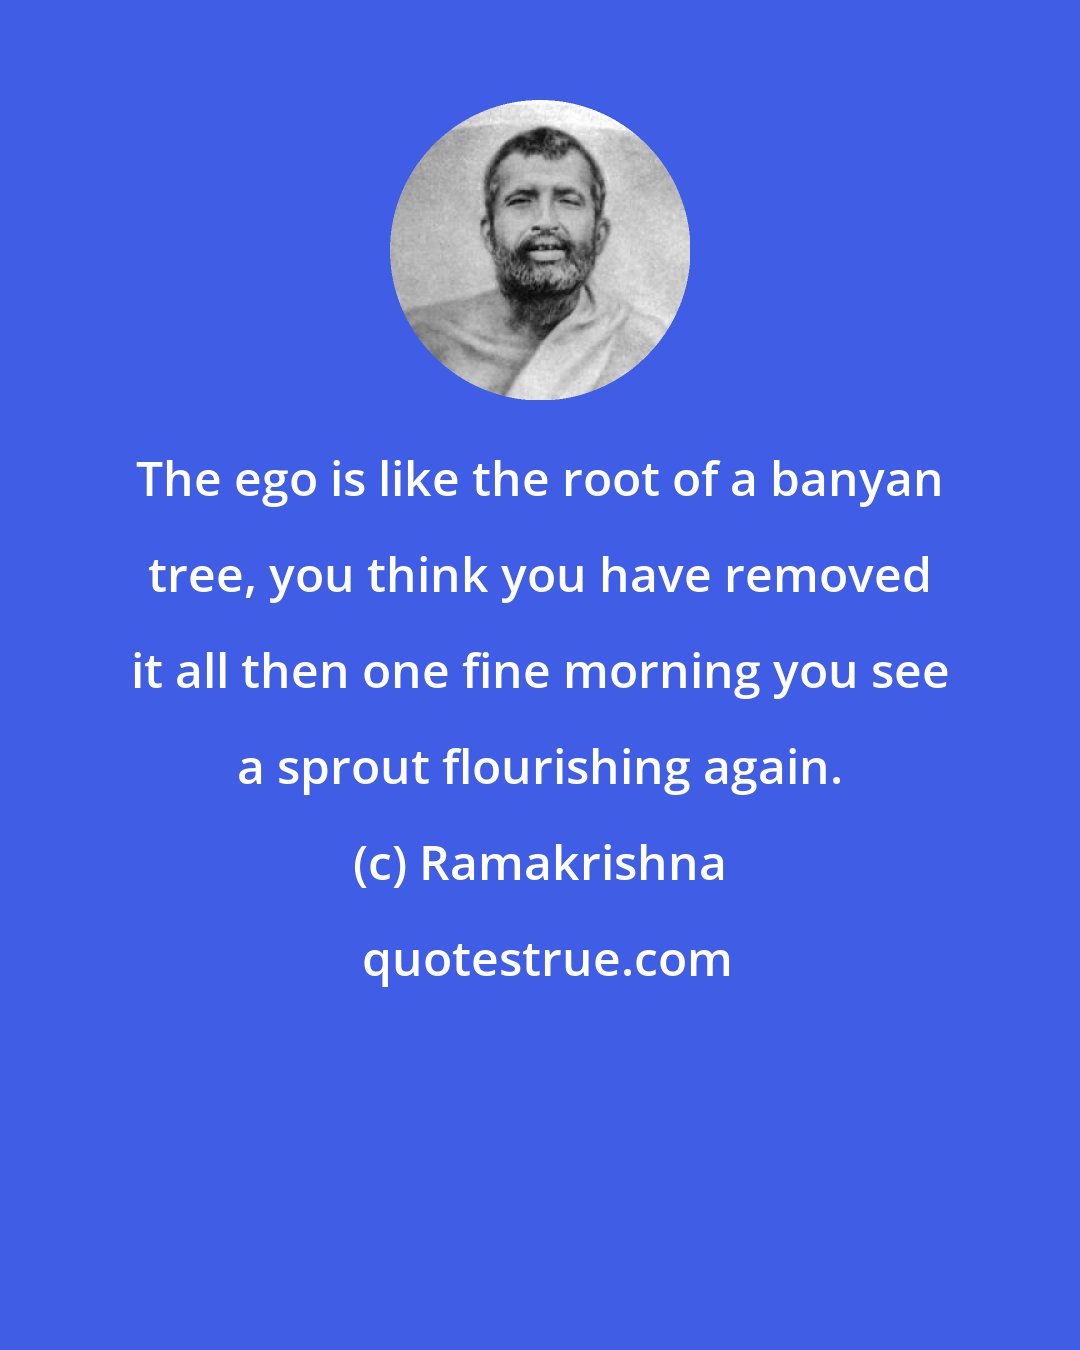 Ramakrishna: The ego is like the root of a banyan tree, you think you have removed it all then one fine morning you see a sprout flourishing again.